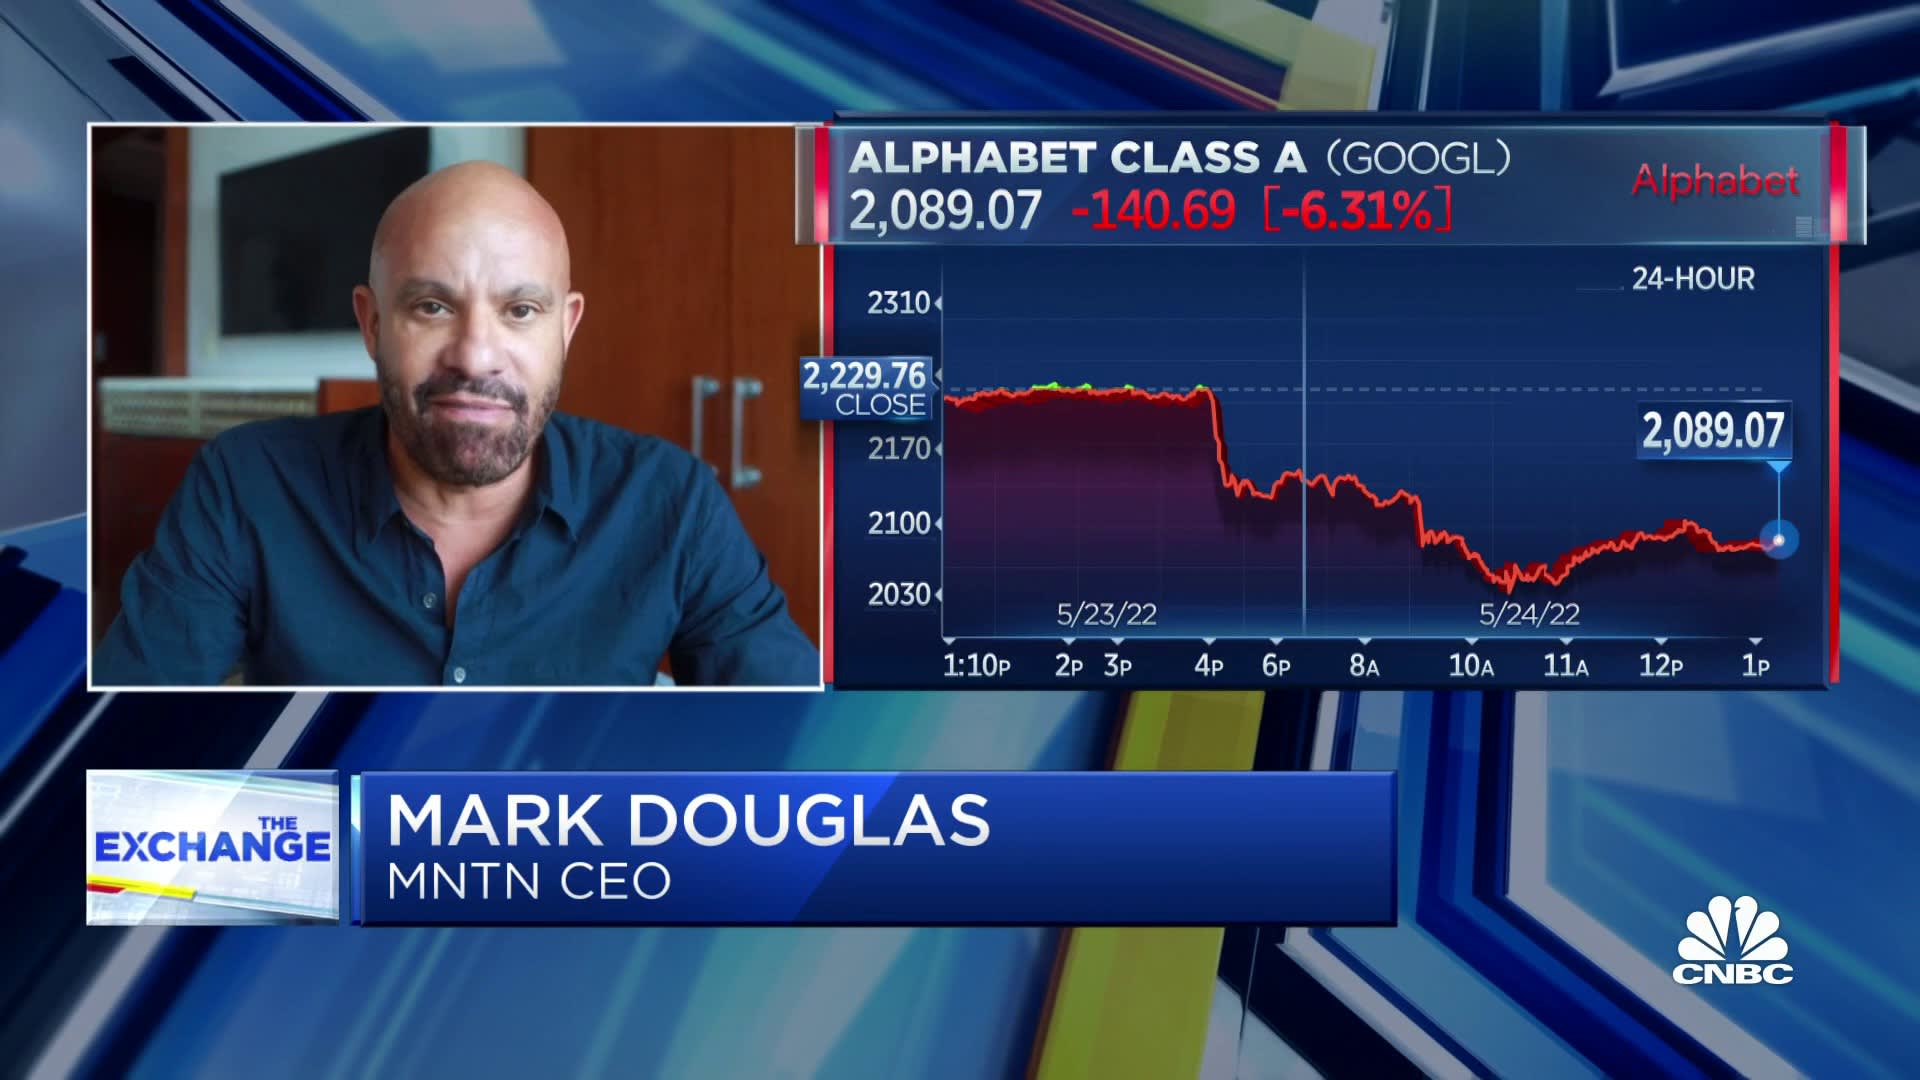 Google is a standout with nothing to worry about in the near-term, says MNTN's Mark Douglas